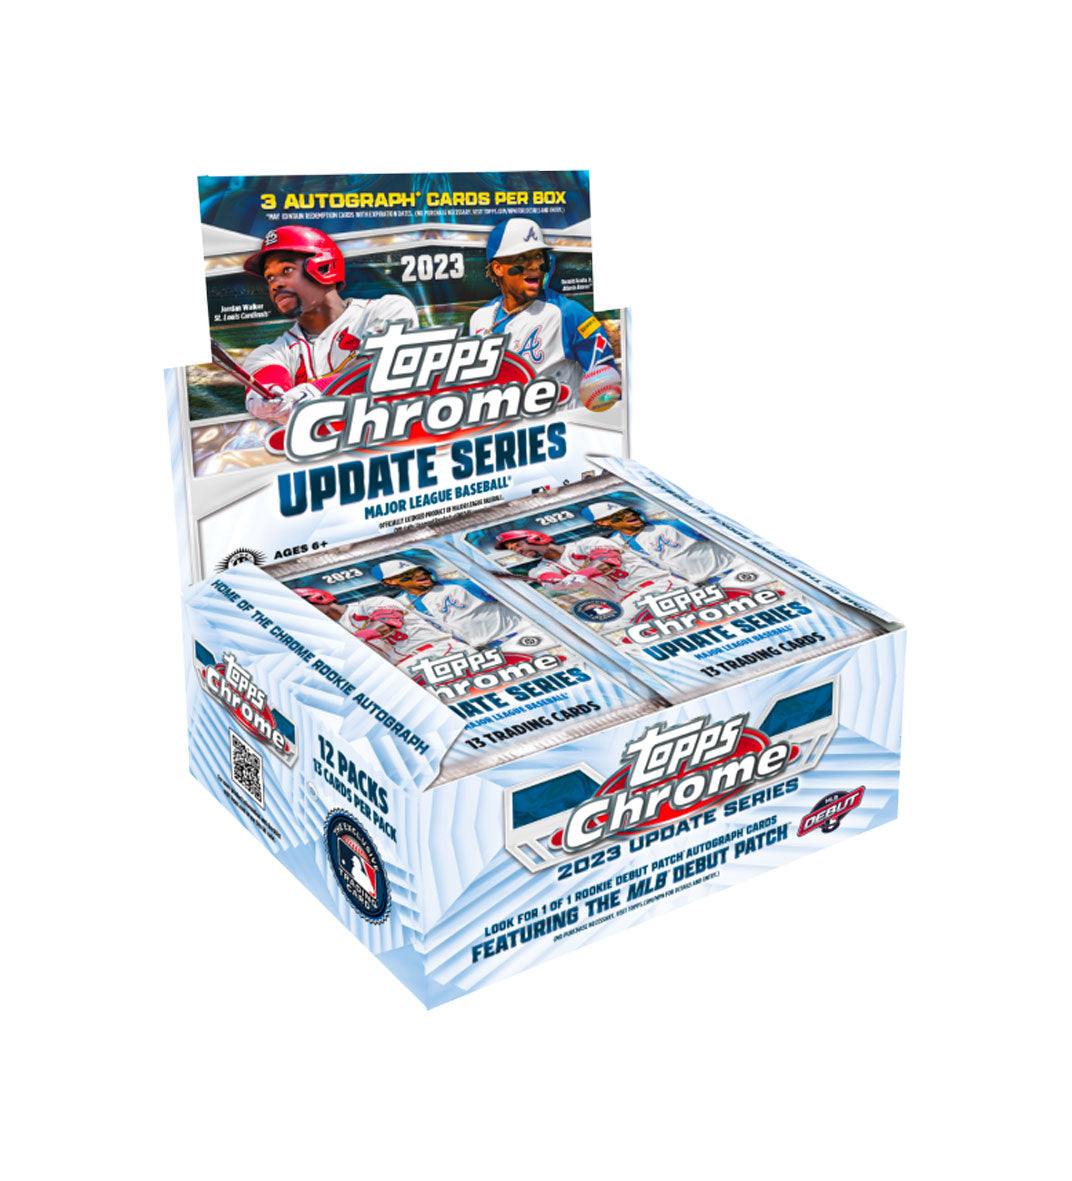 2023 Topps Chrome Update Baseball Jumbo Hobby Box Unwrap the ultimate 2023 Topps Chrome Update Baseball Jumbo Hobby Box, filled with diverse inserts and 3 autograph cards per box, guaranteed! Crafted with extra-thick chrome-fused tech, revel in the beauty and power of these collector cards. Secure your box today and be part of the action!